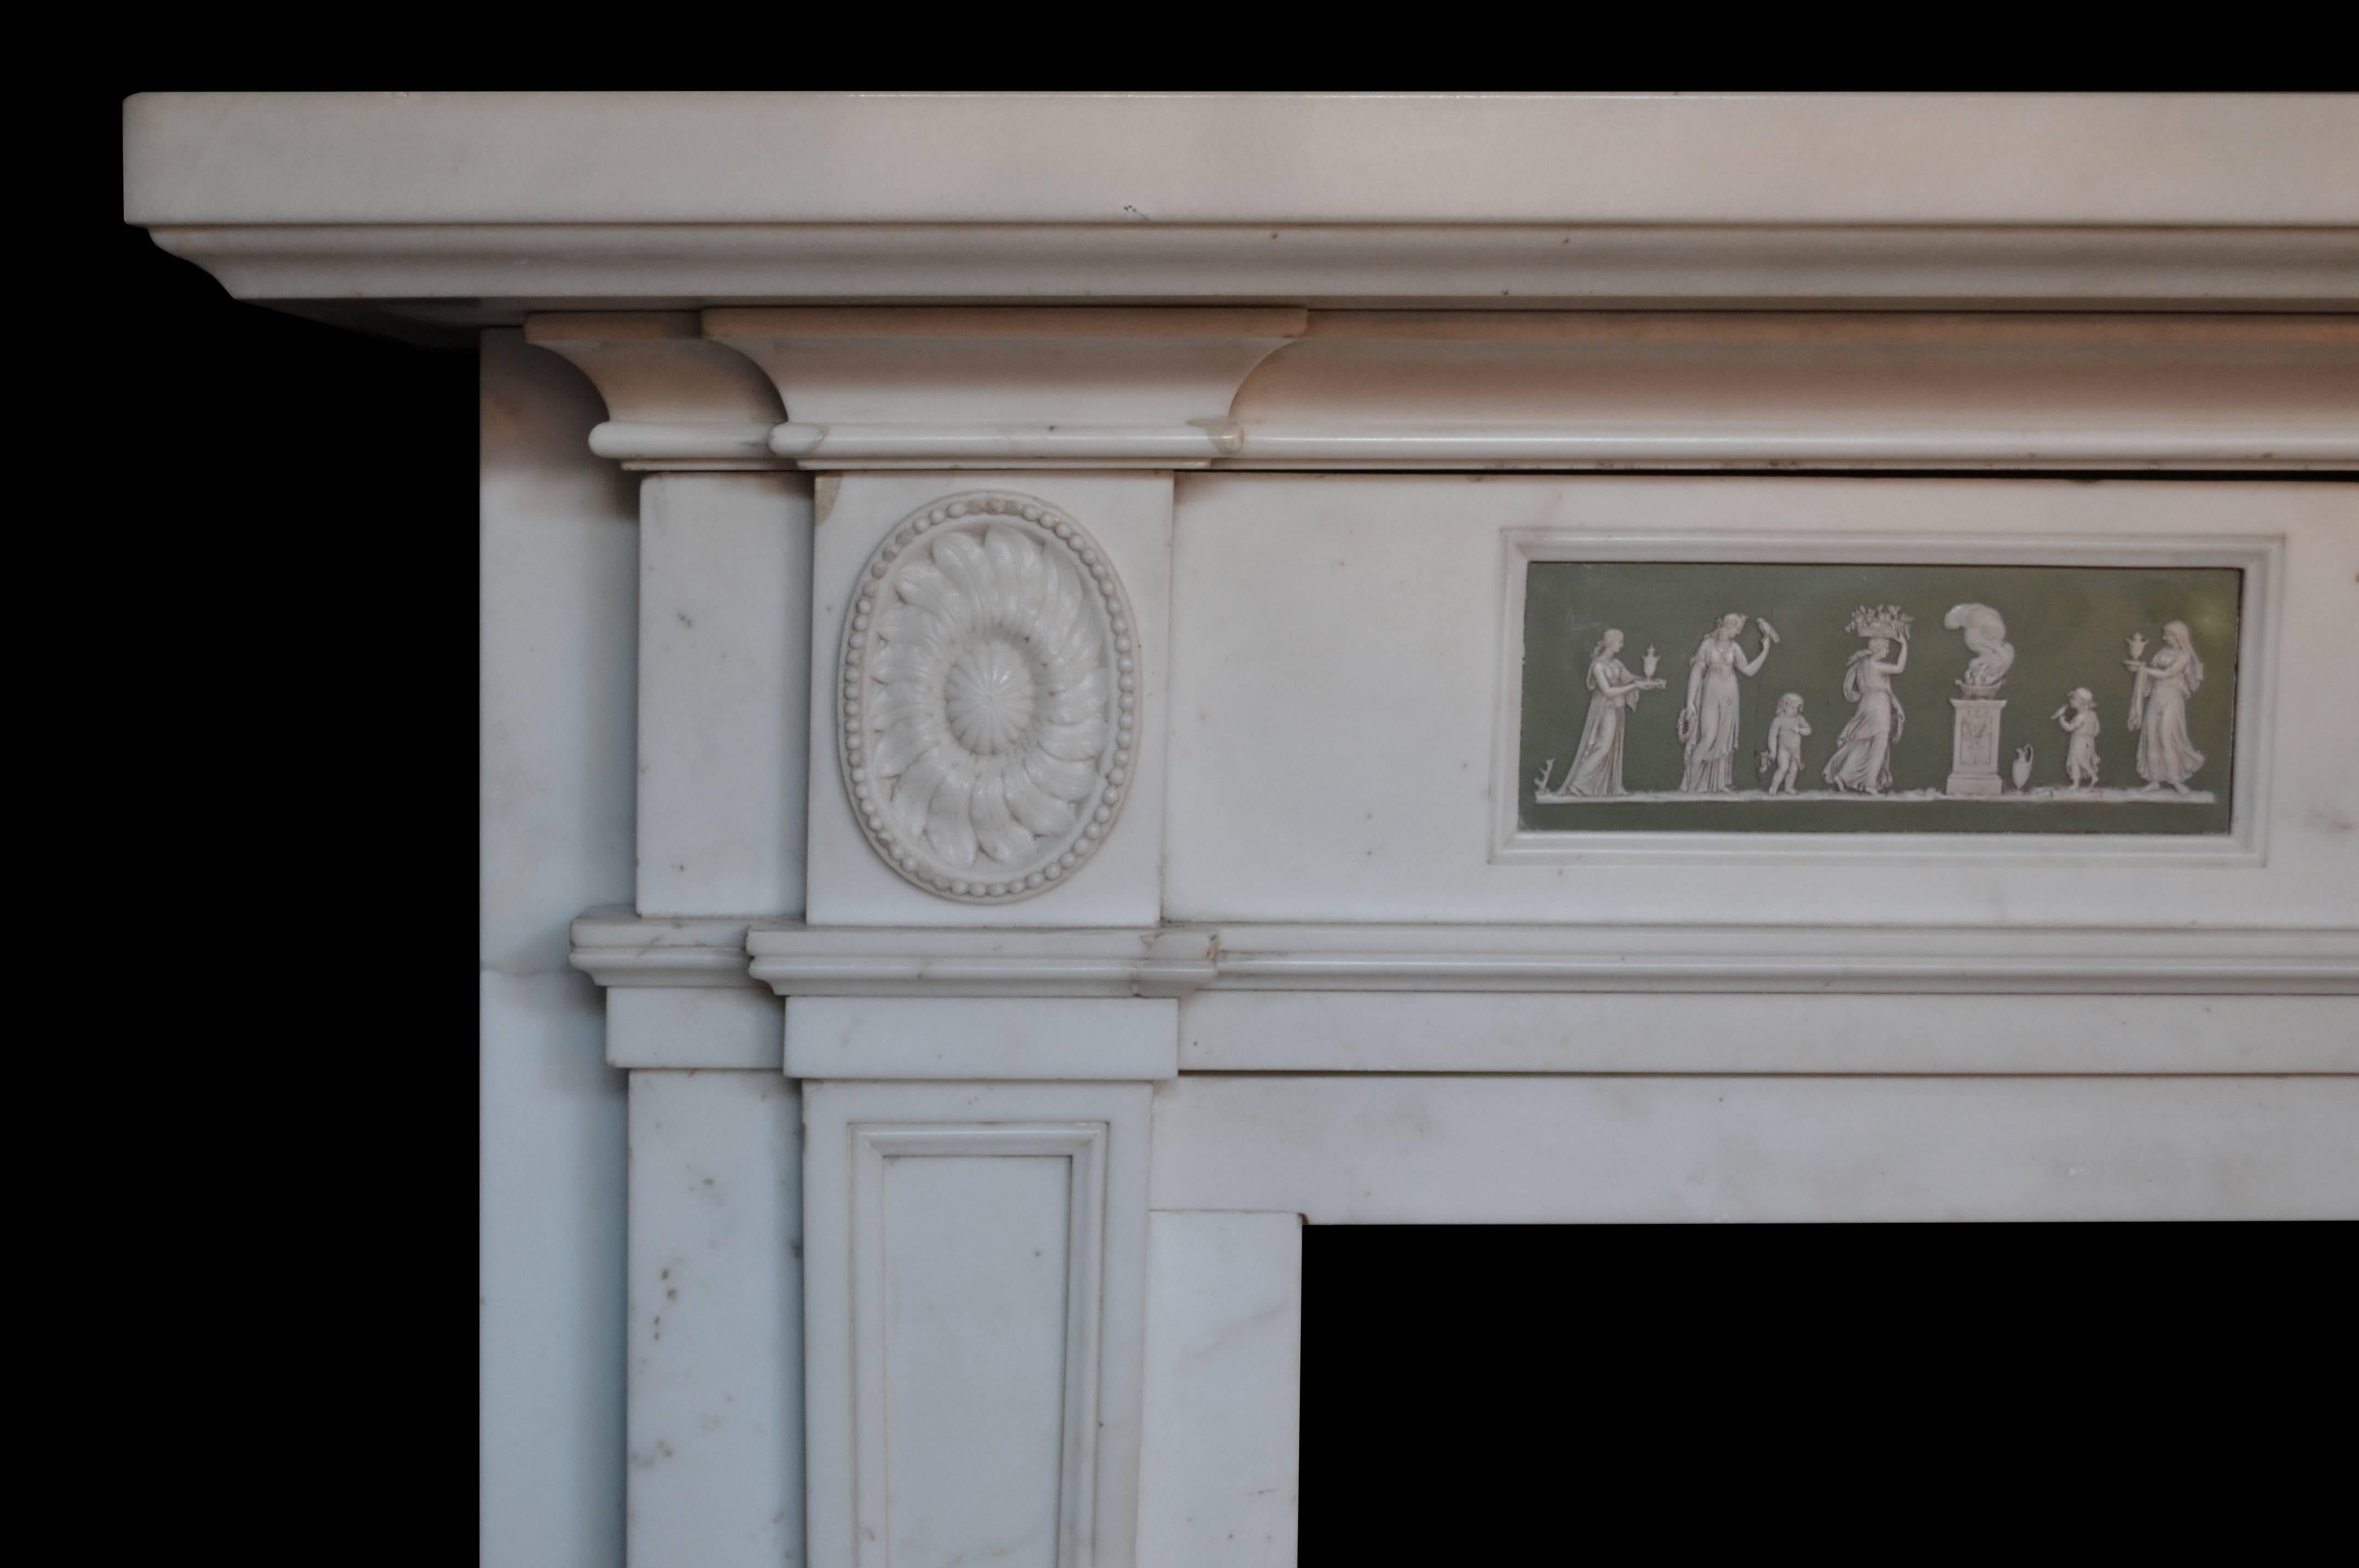 A generously proportioned mantel carved in statuary marble with two medallions and a center tablet with carvered urn. The mantel frieze features two porcelain wedgewood panel inlays. 

Opening dimensions: 47 1/2